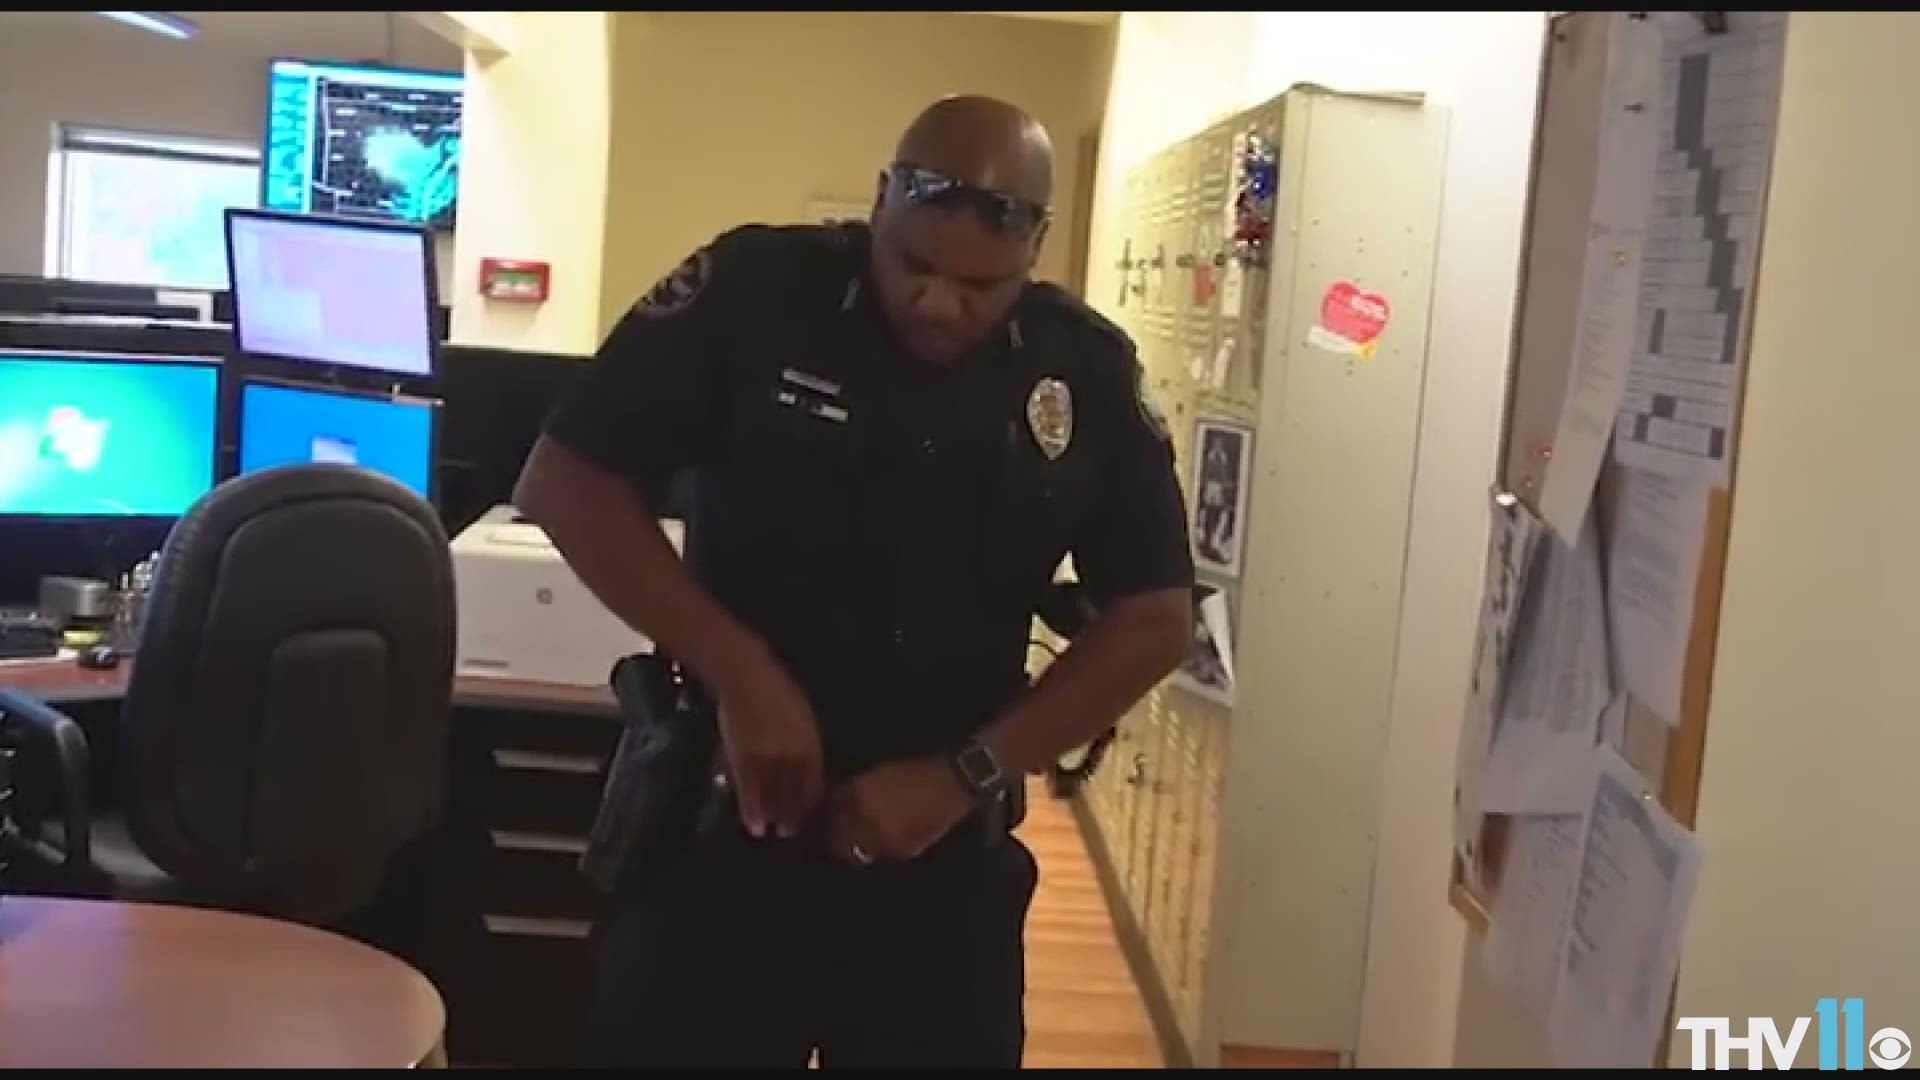 The Little Rock Police Department sing 'Eye of the Tiger' for their lip-sync challenge.